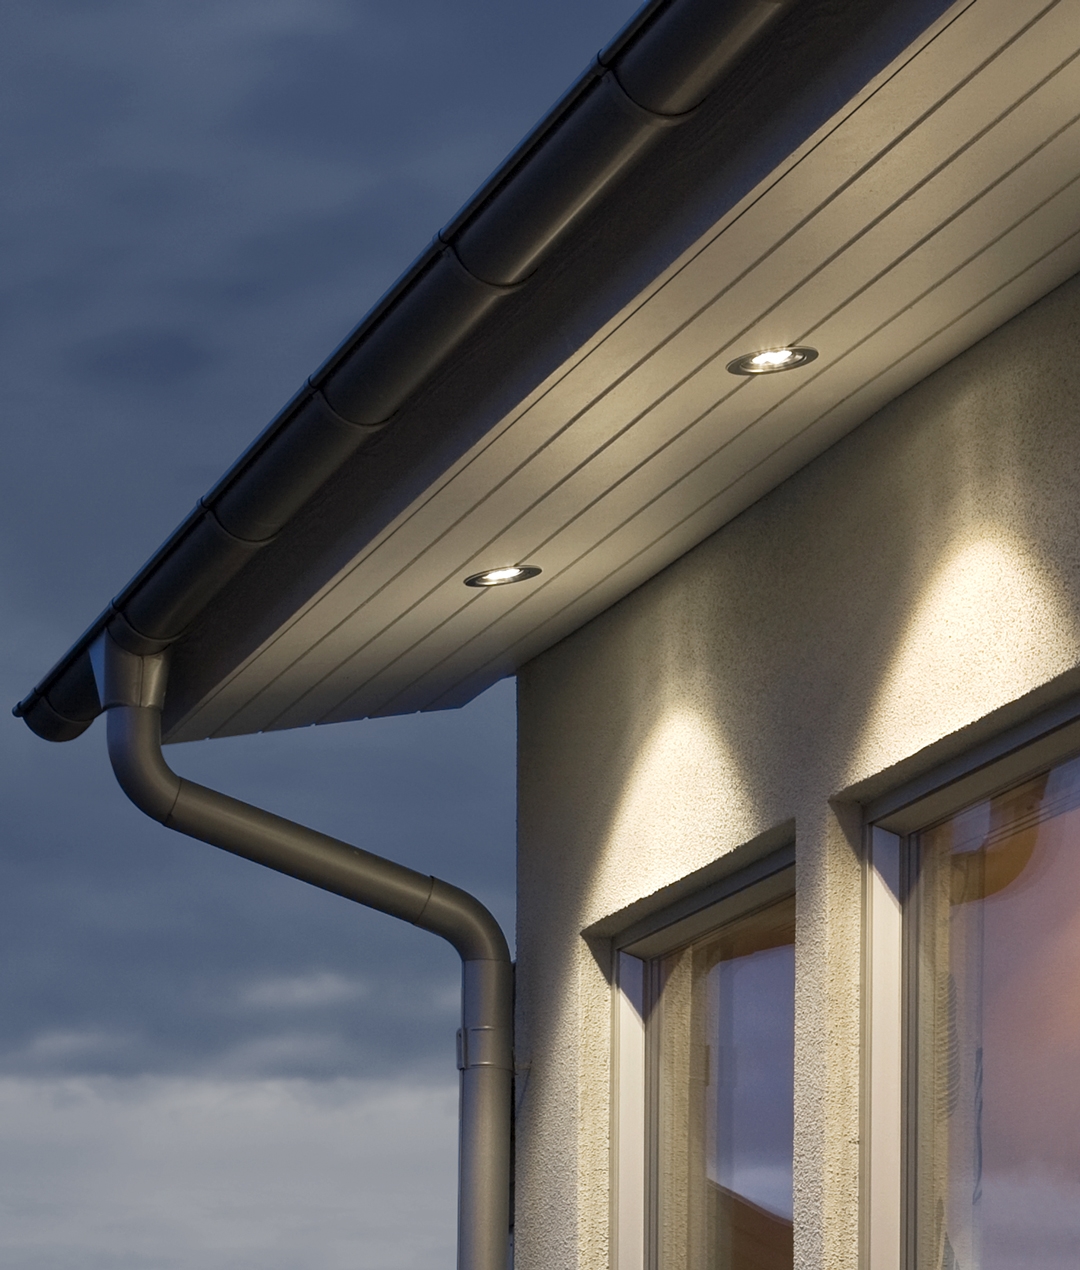 Exterior Soffit Can Lights With Contemporary Exterior - Image to u